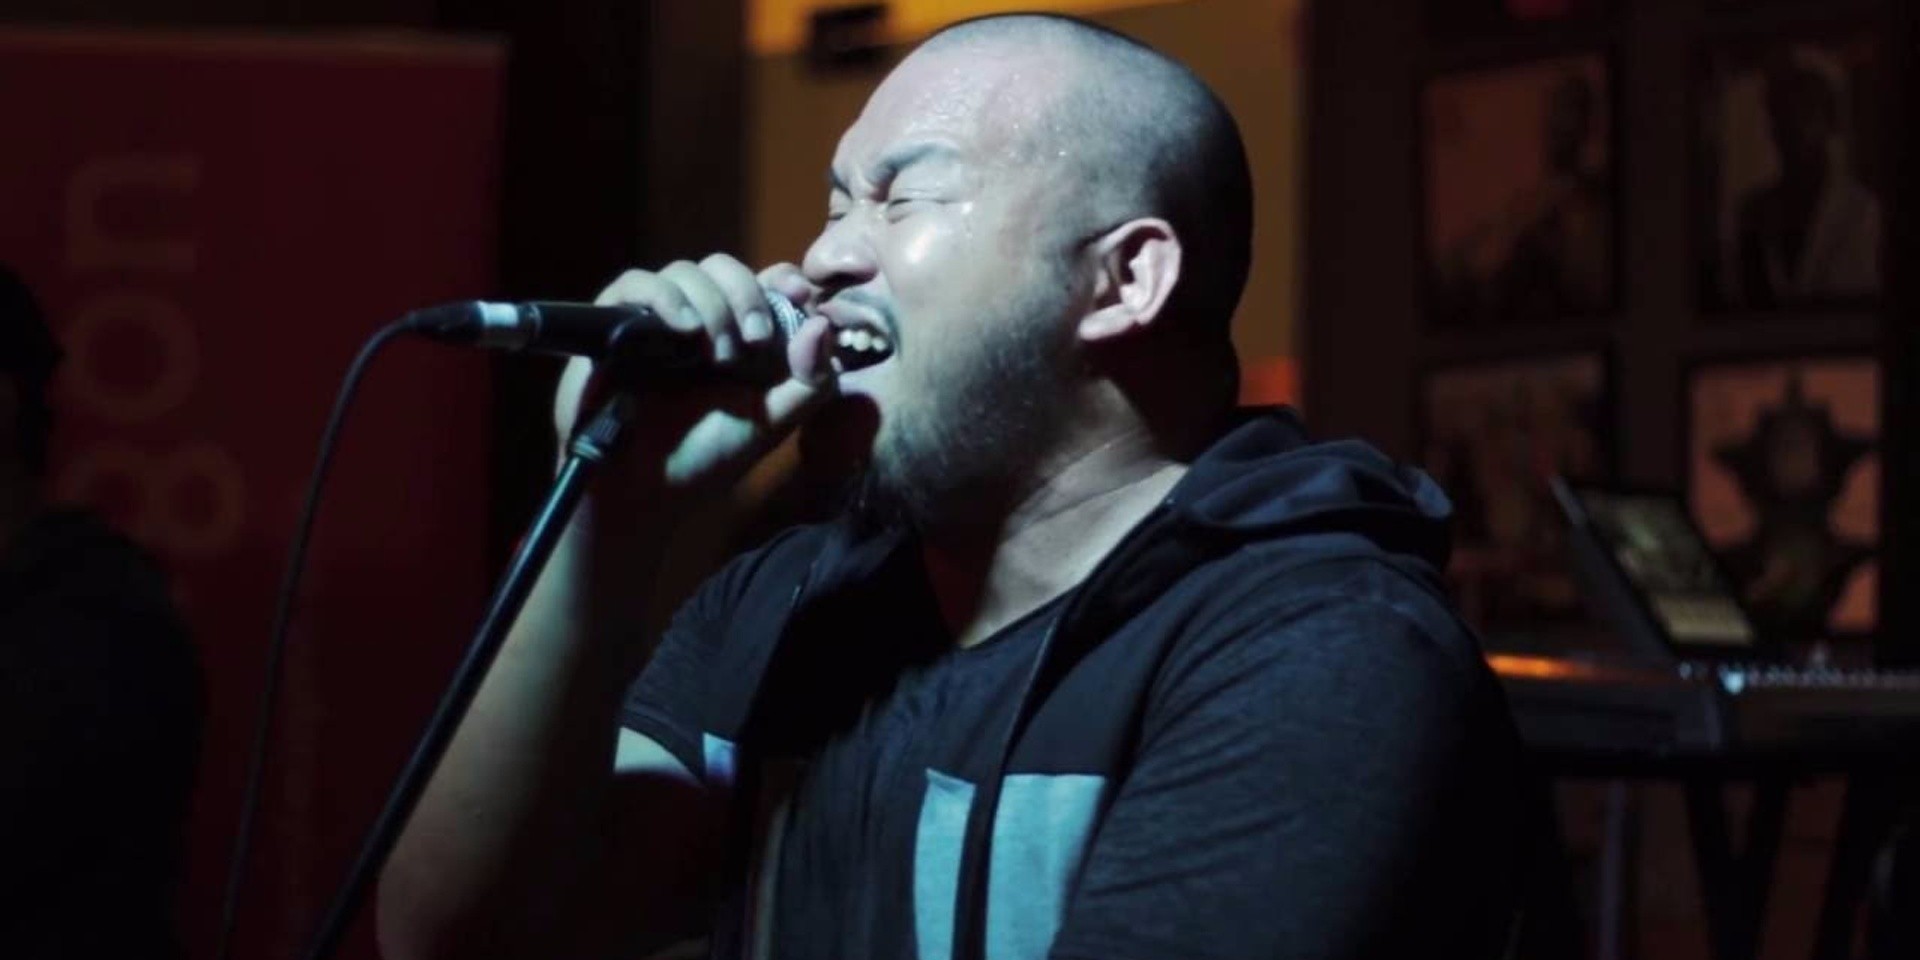 WATCH: Filipino rapper QUEST spits fire during his live performance at Barber Shop by Timbre